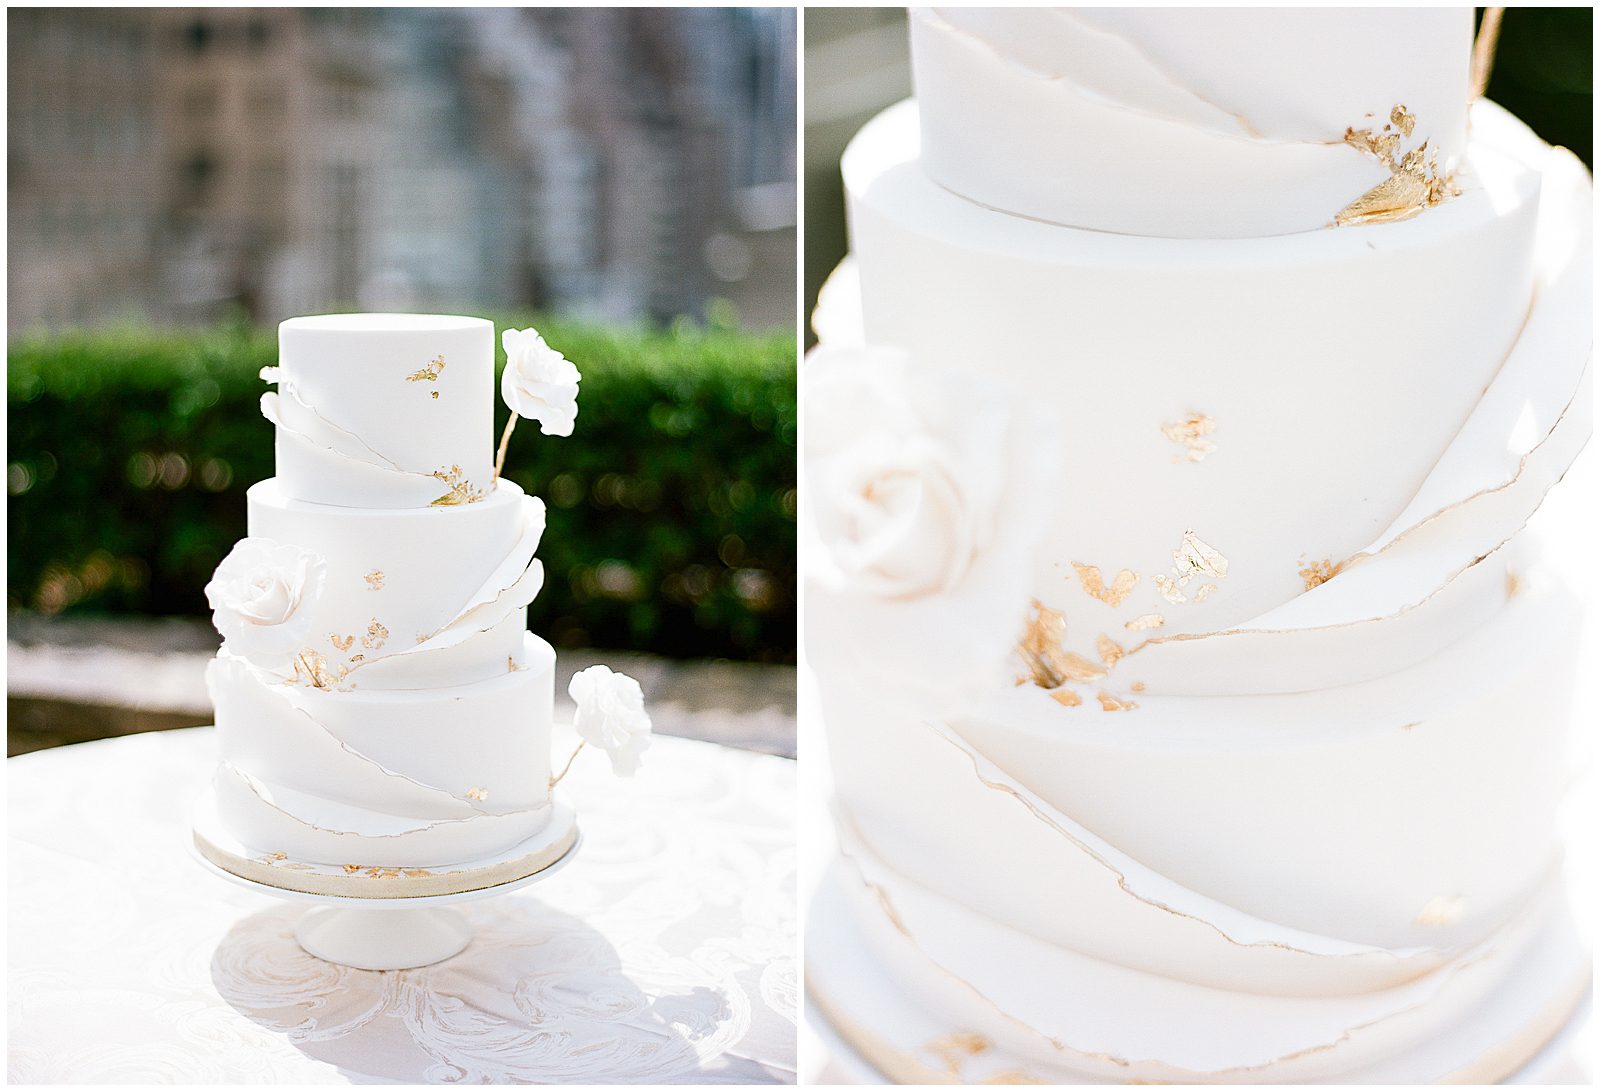 White Wedding Cake with Gold Leaf Details Photos